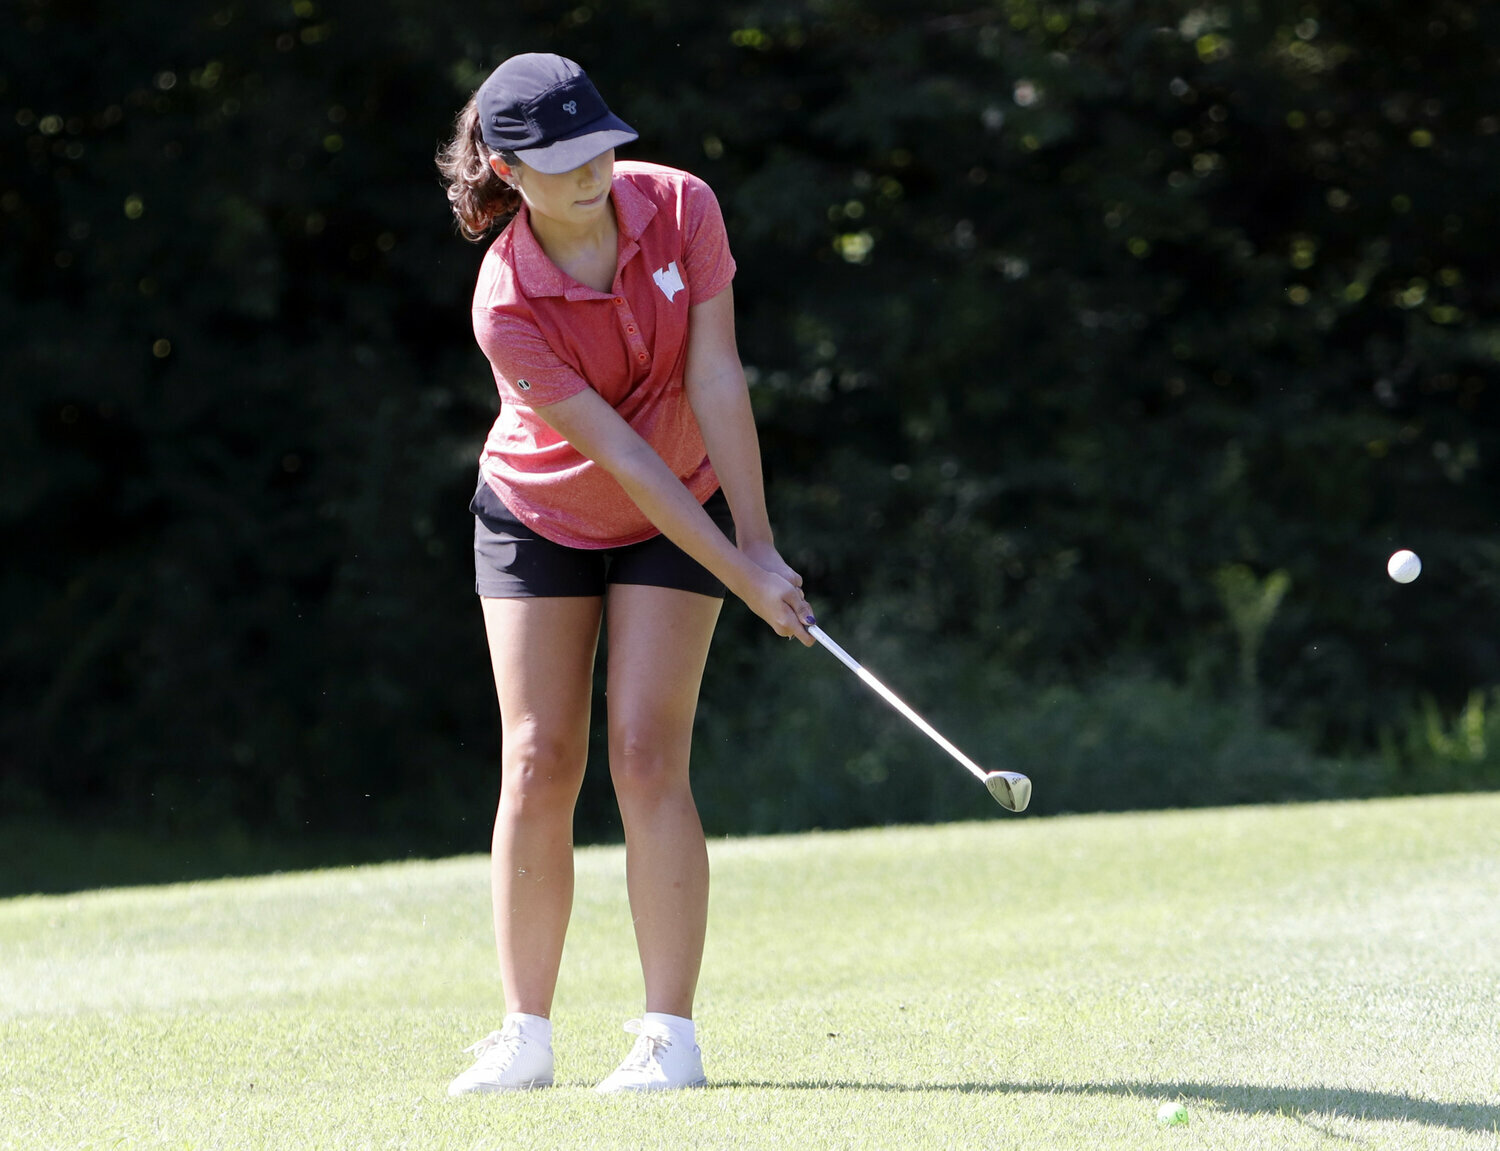 Warrenton senior Merrick Owens hits a shot during a match earlier this season. Owens recently competed at the Class 3 state golf meet in Farmington.